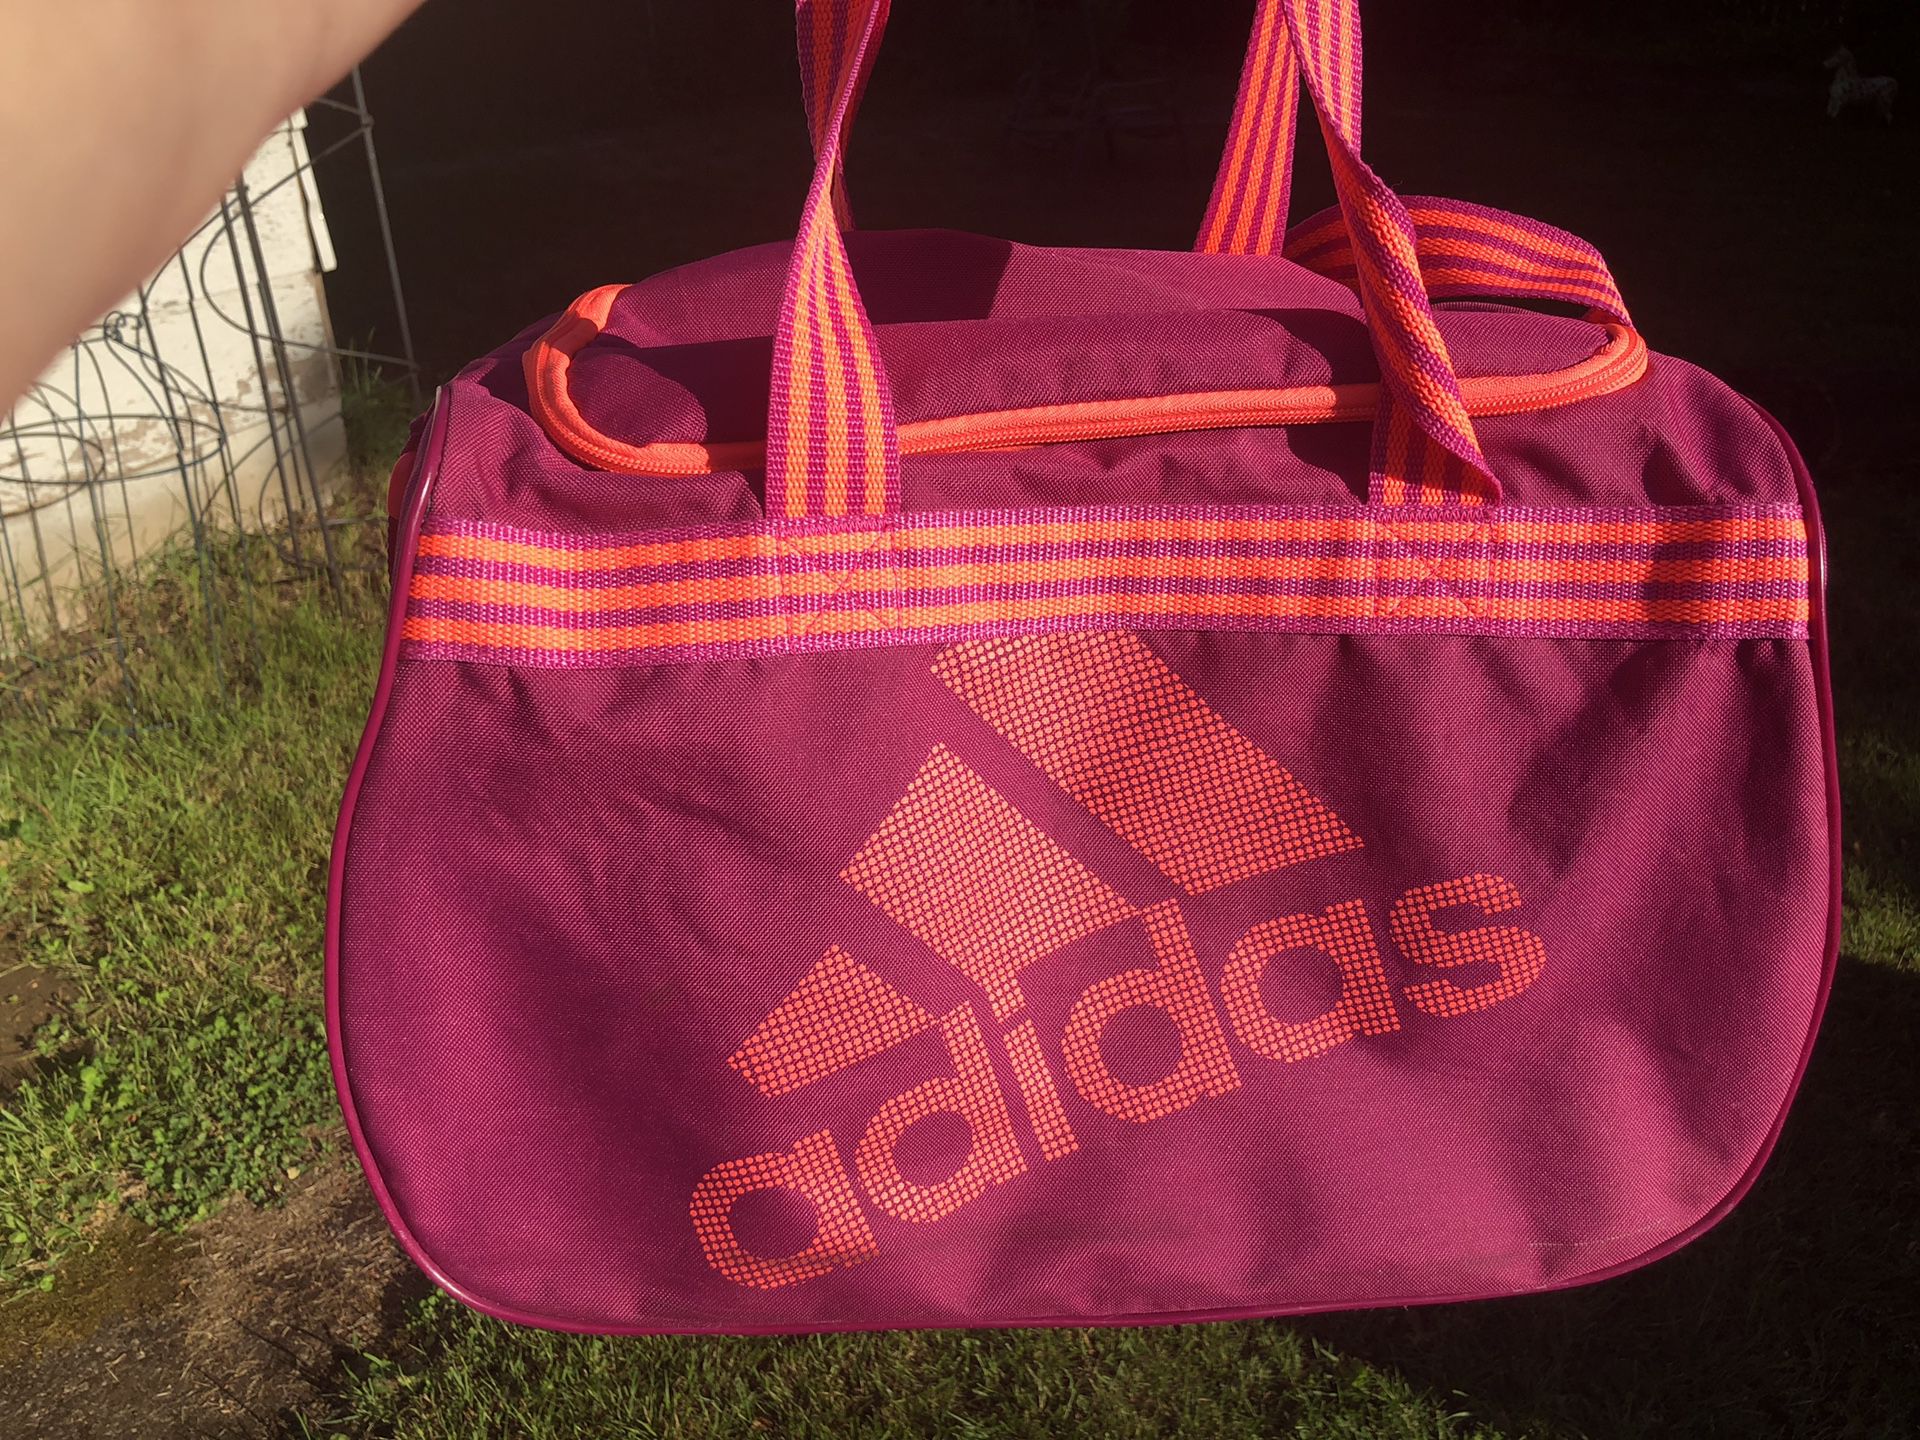 Colorful Adidas Duffle Gym Sport Bag with Striped Straps!